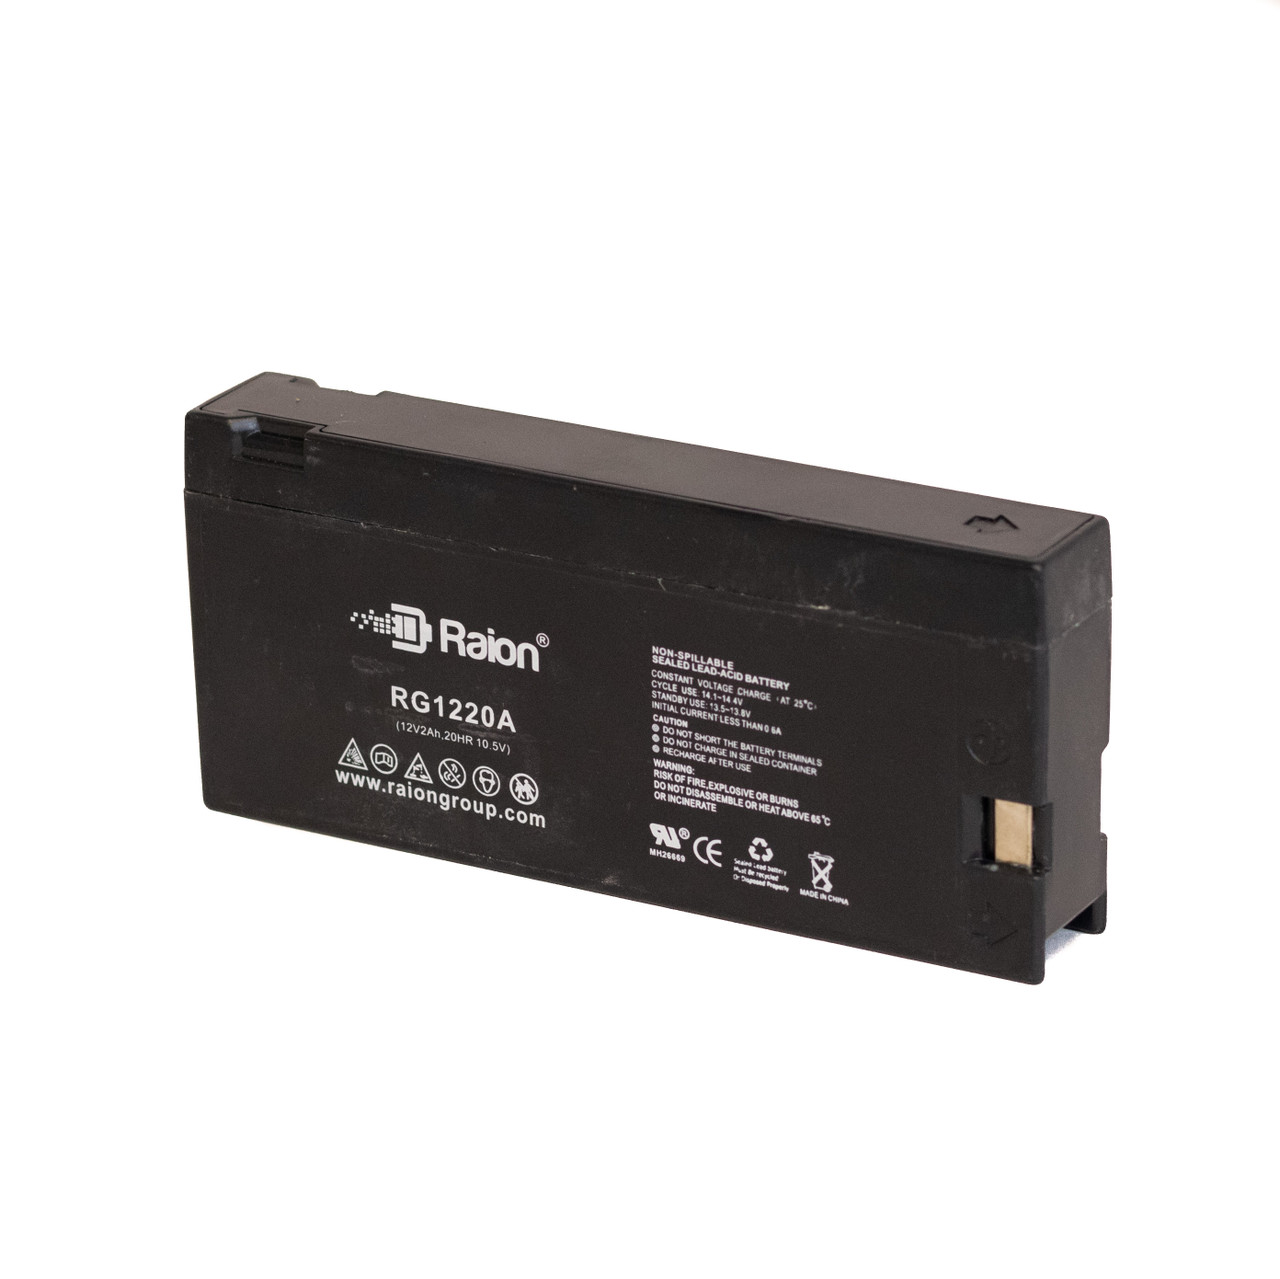 Raion Power RG1220A Replacement Battery for JC Penney 855-3026